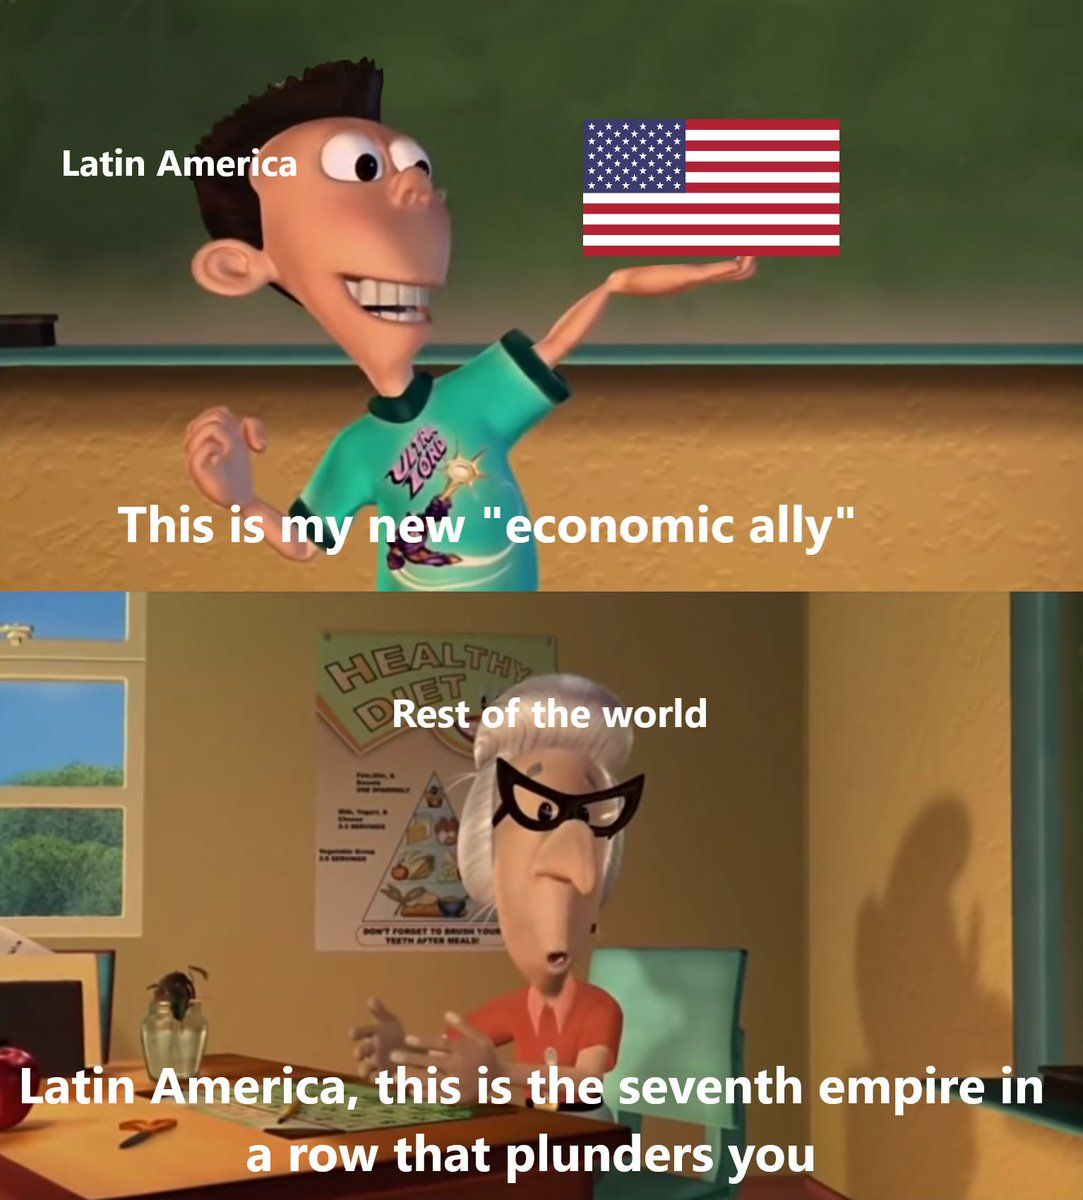 You never learn from history, Latin America!